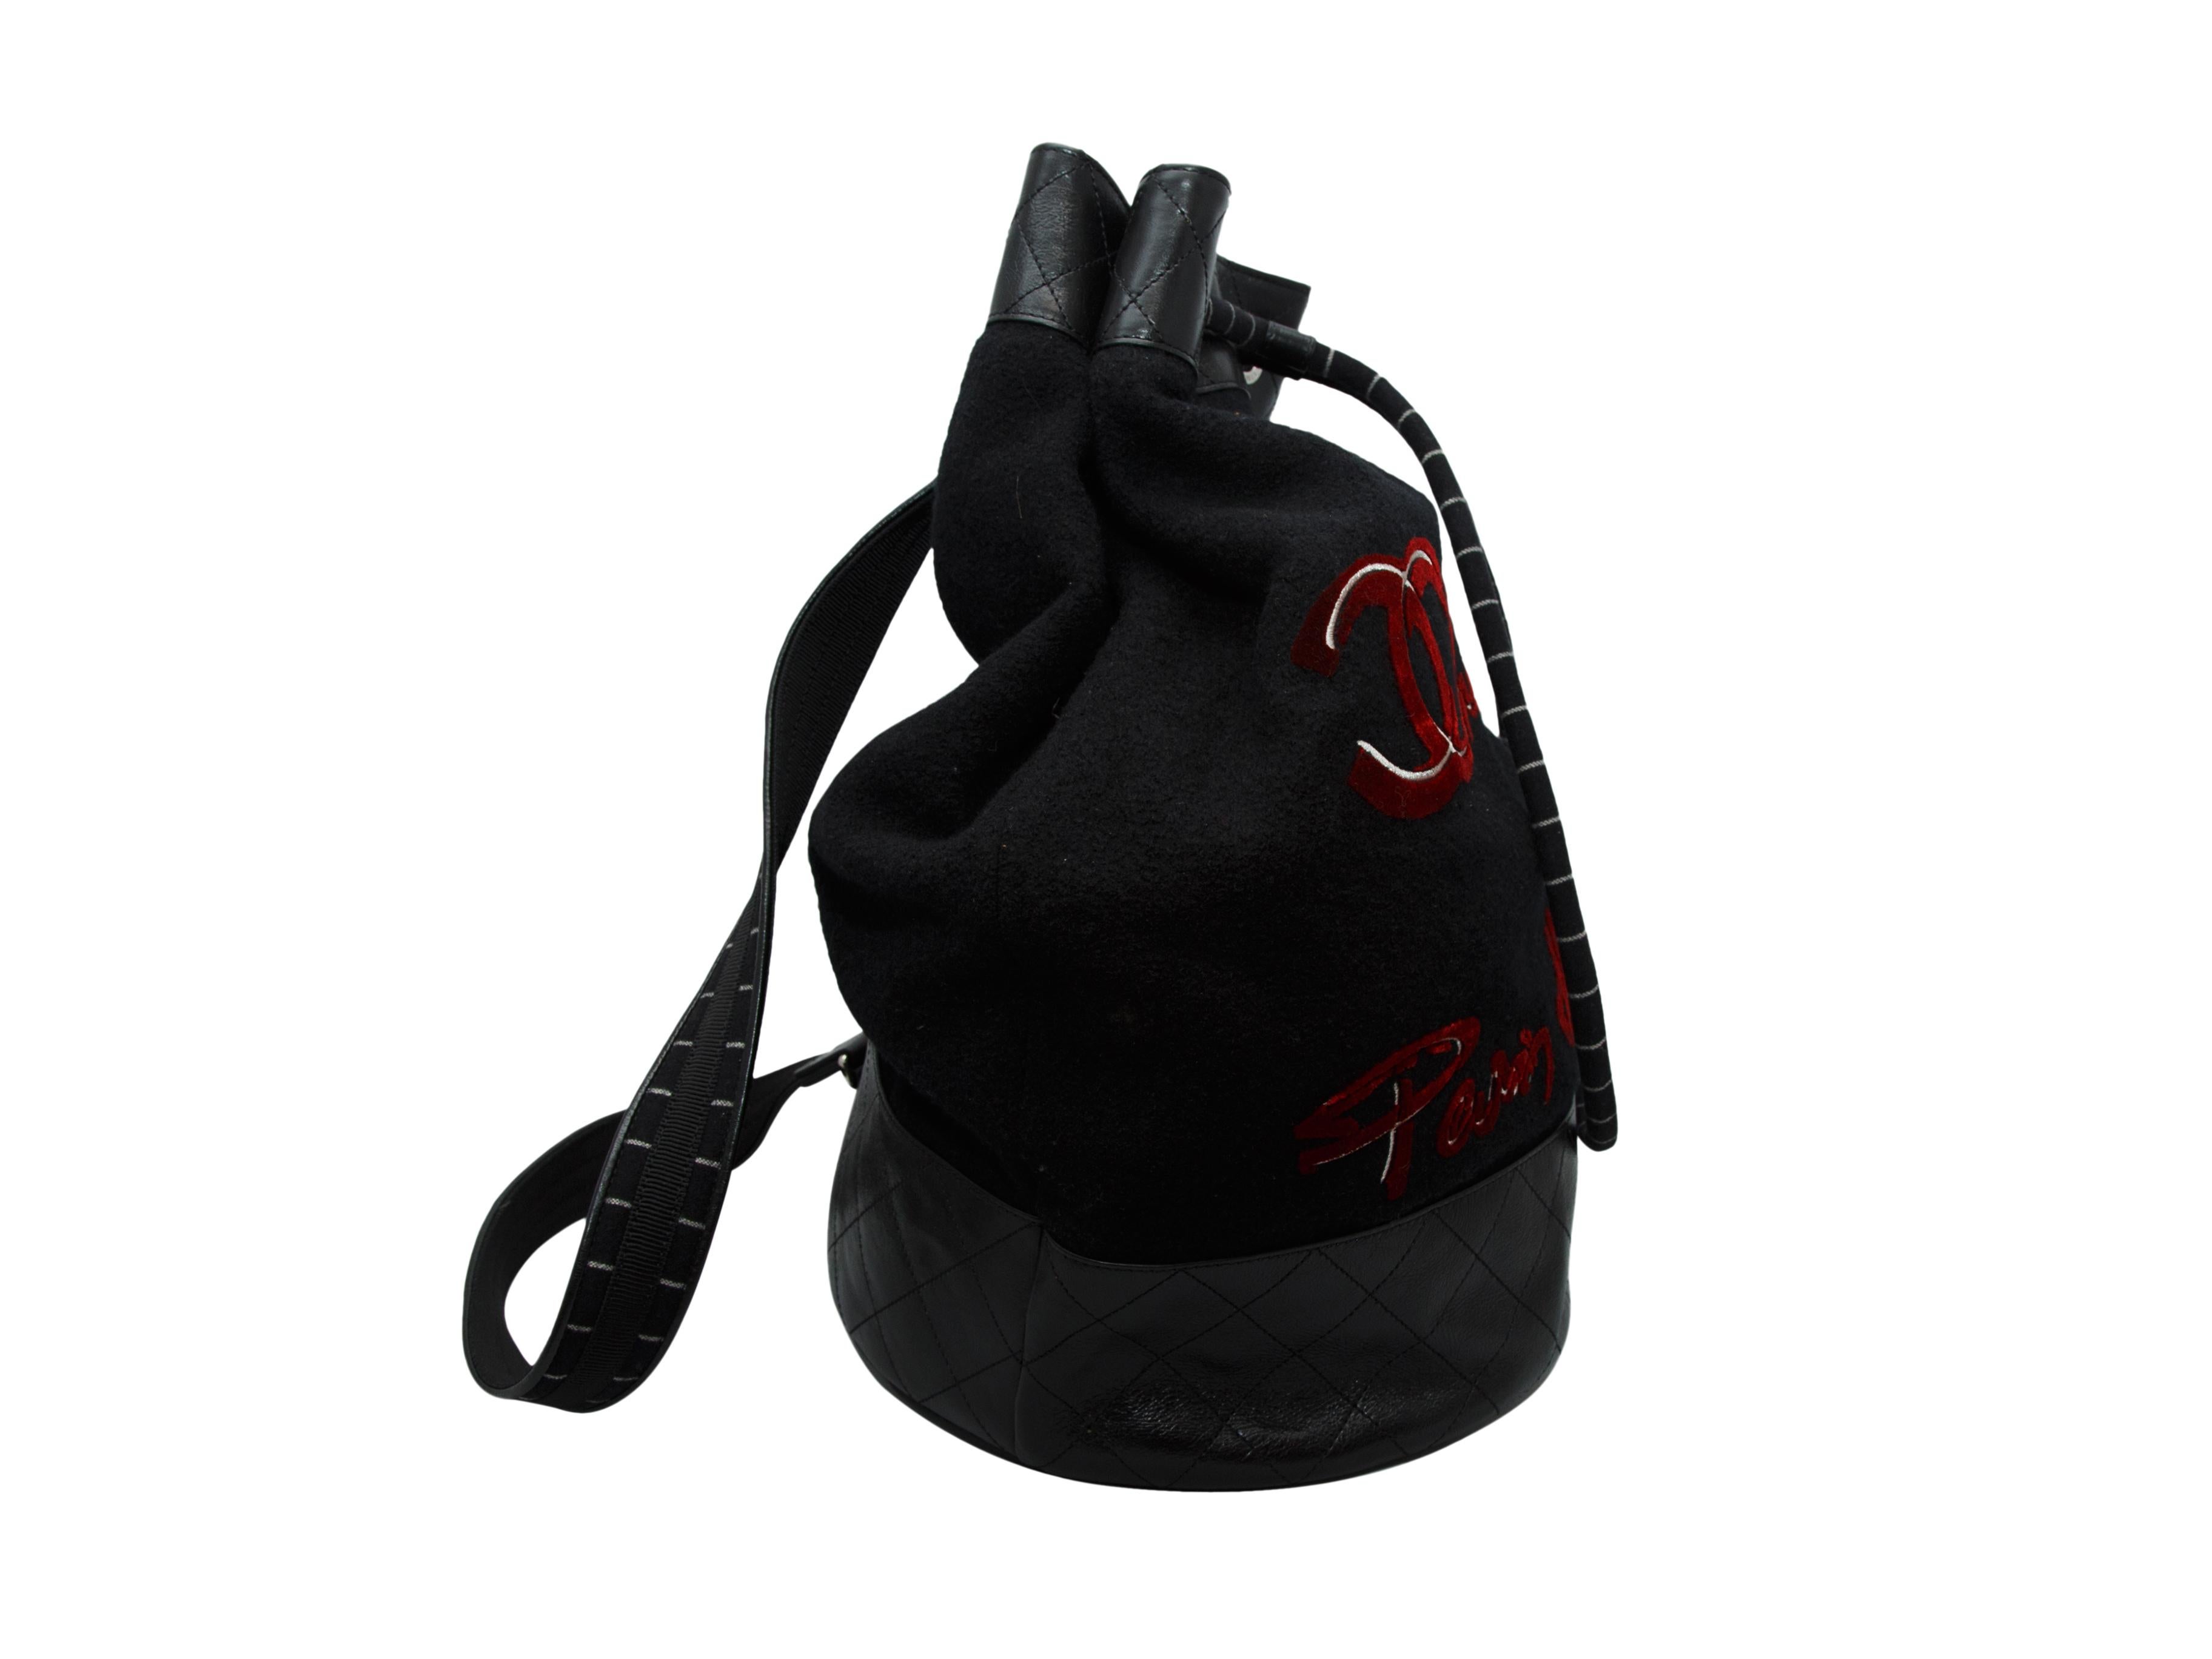 Product details: Black canvas and leather backpack by Chanel. From the Fall 2018 Collection. Black and red embroidery at exterior. Silver-tone hardware. 16